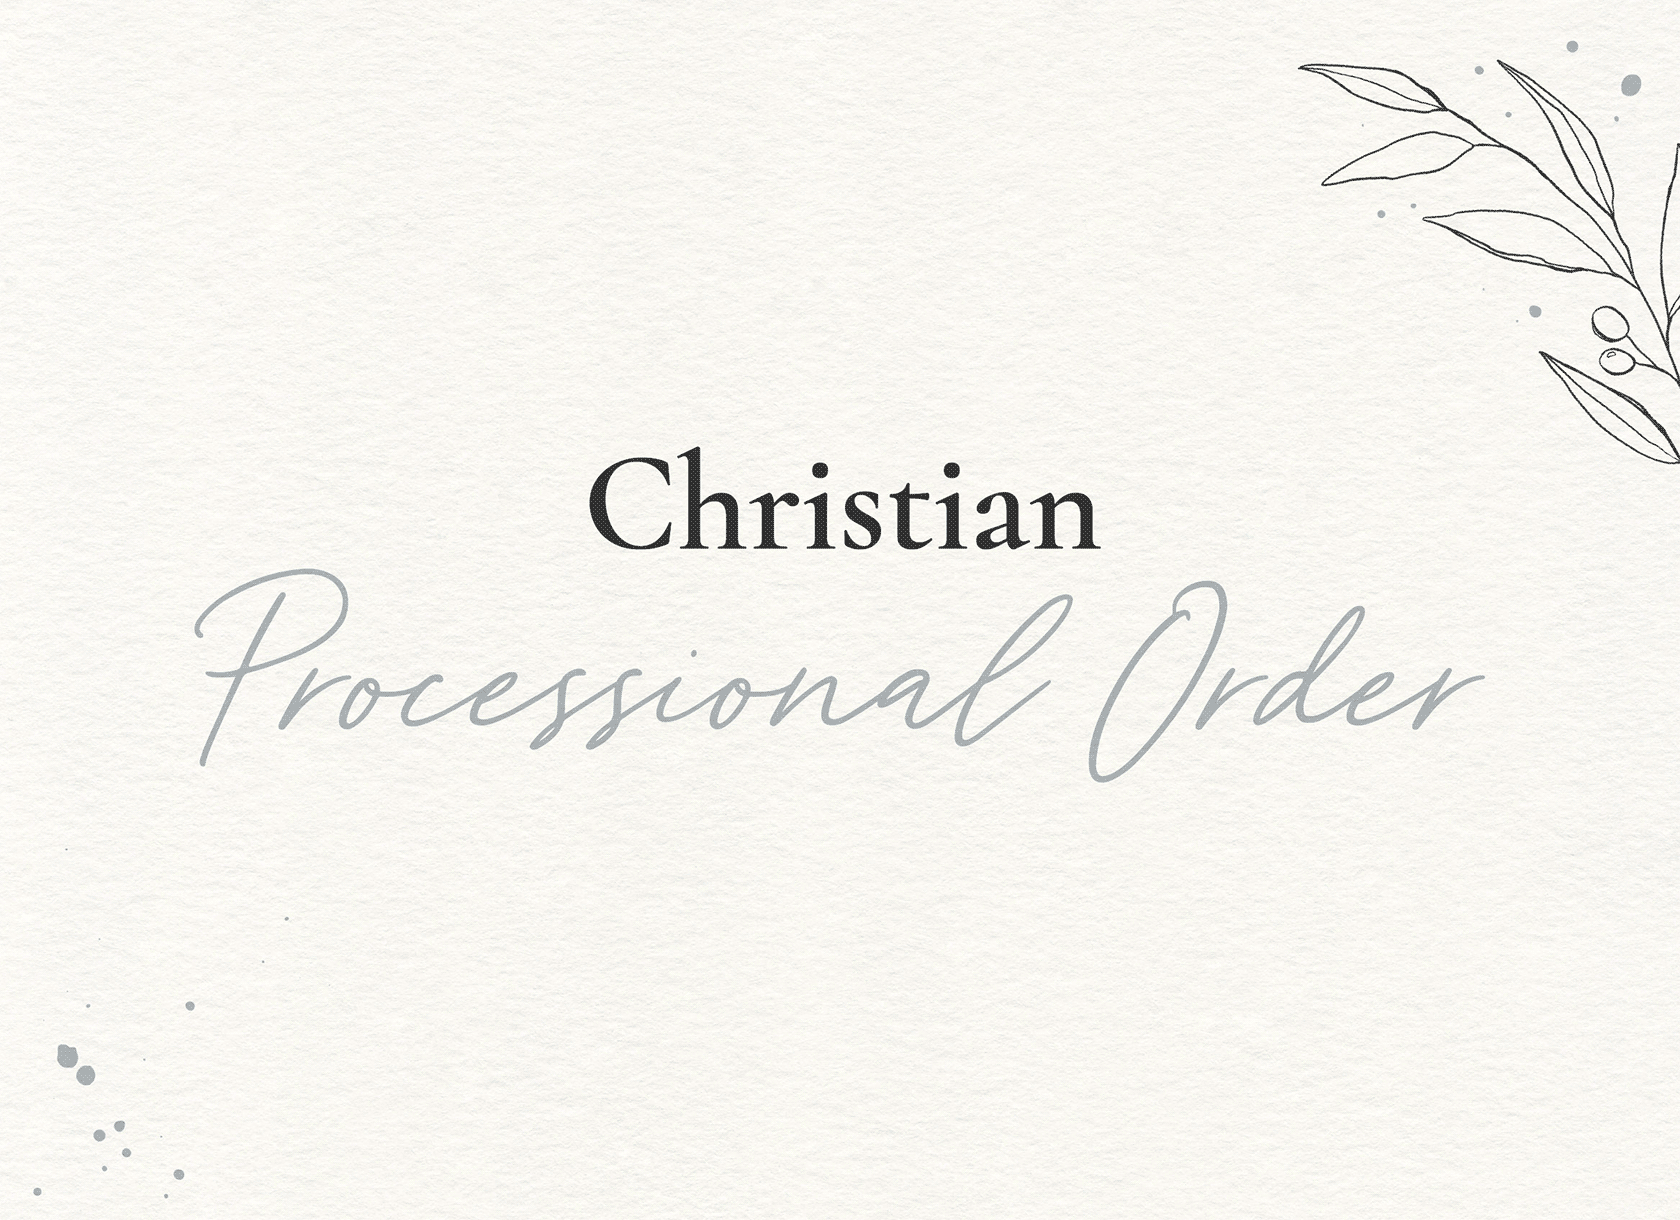 Christian Procesional Order